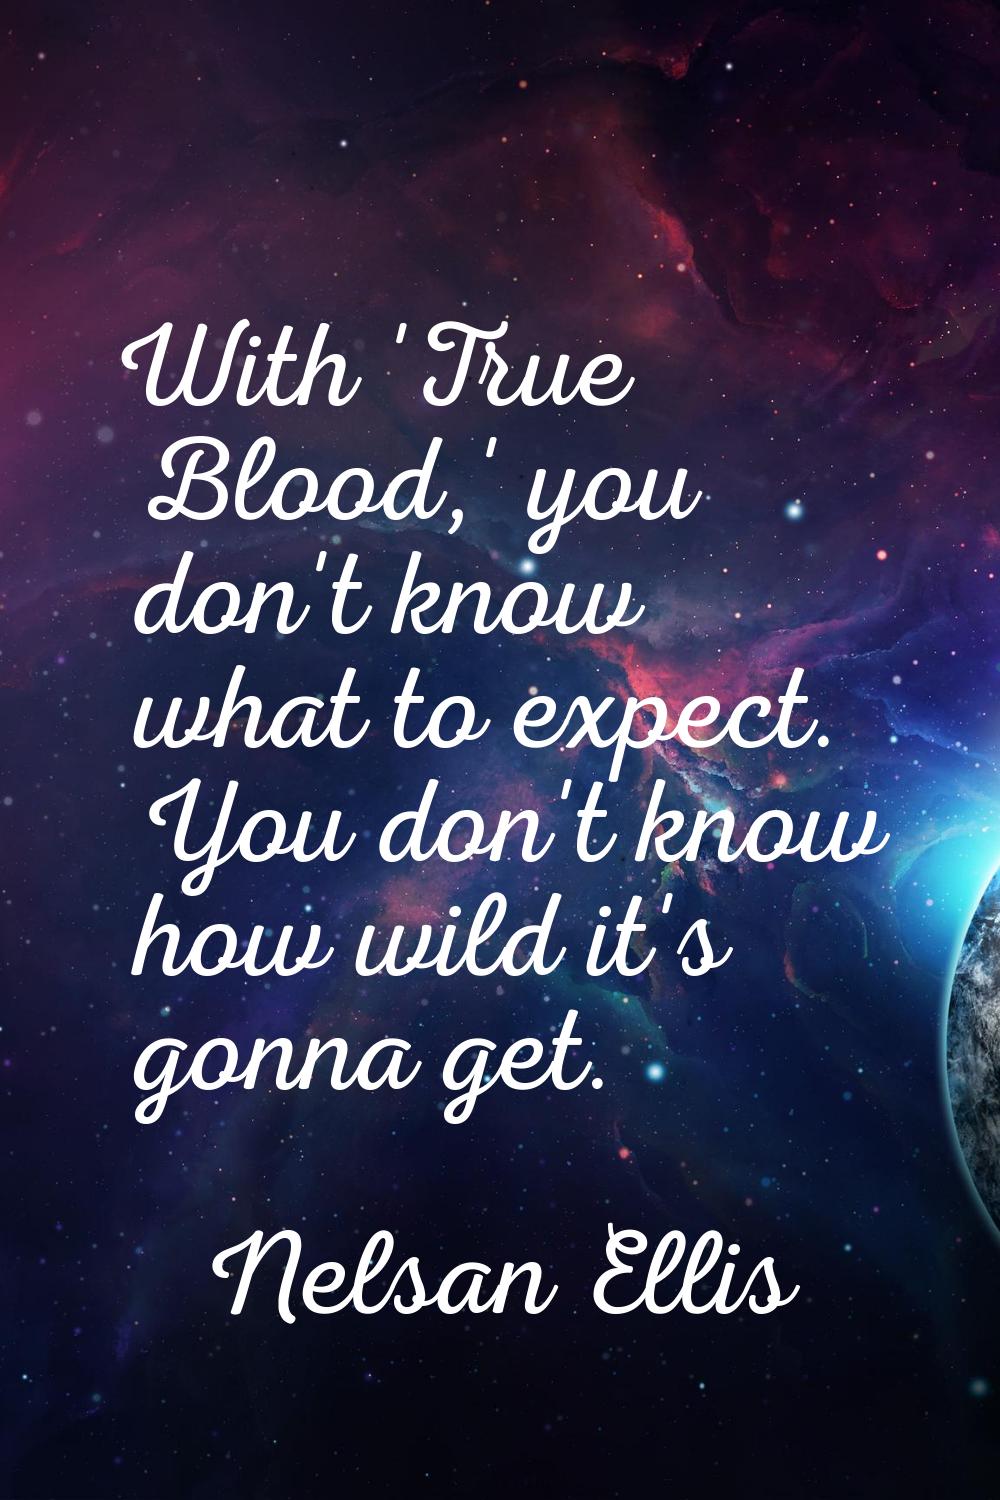 With 'True Blood,' you don't know what to expect. You don't know how wild it's gonna get.